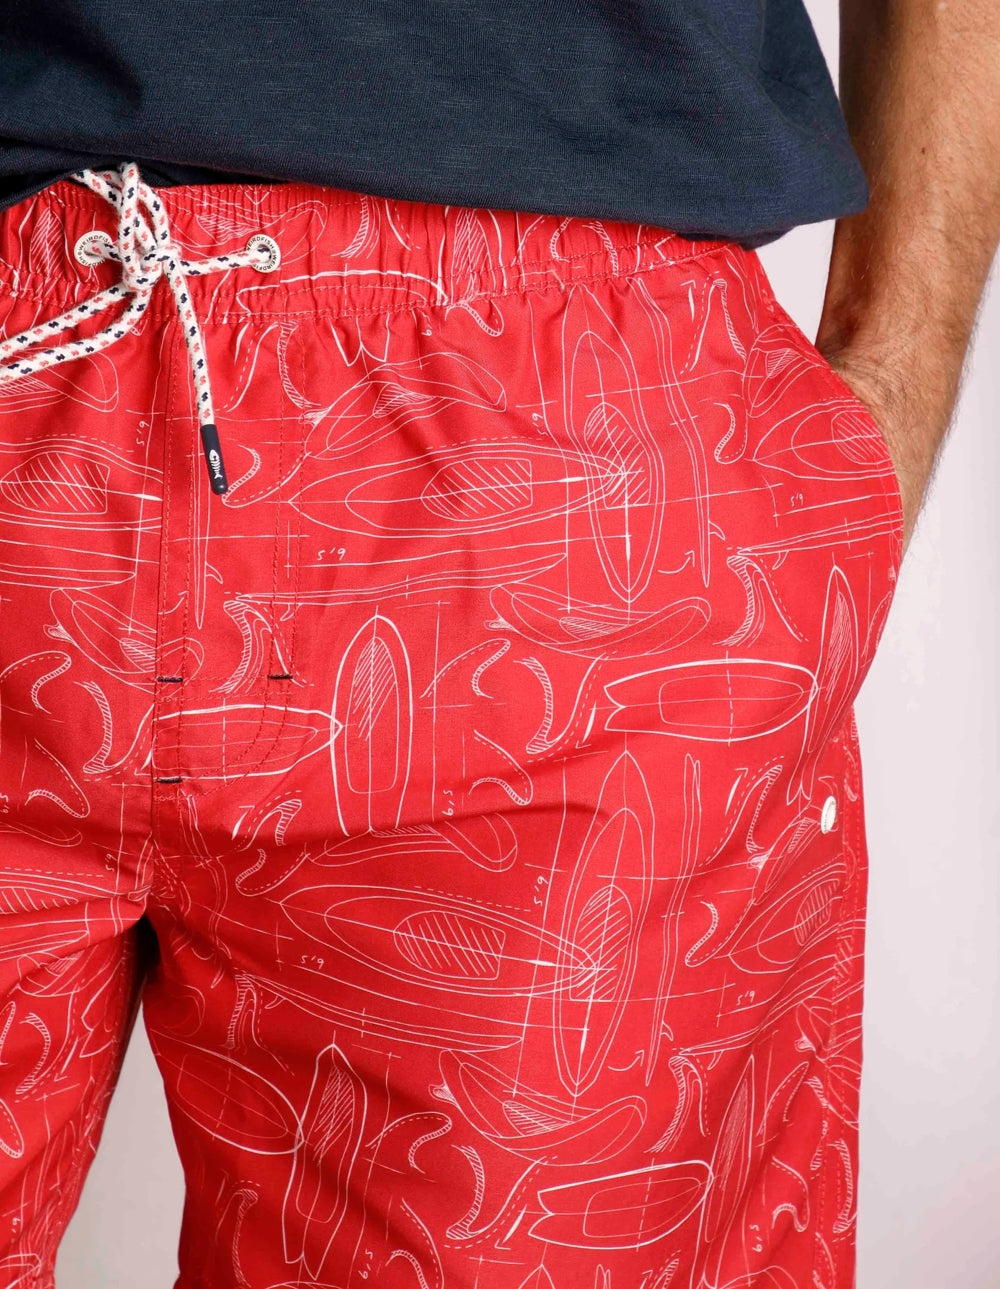 Weird Fish men's Belukha Radical Red swim shorts with surfboard print and hip pockets.